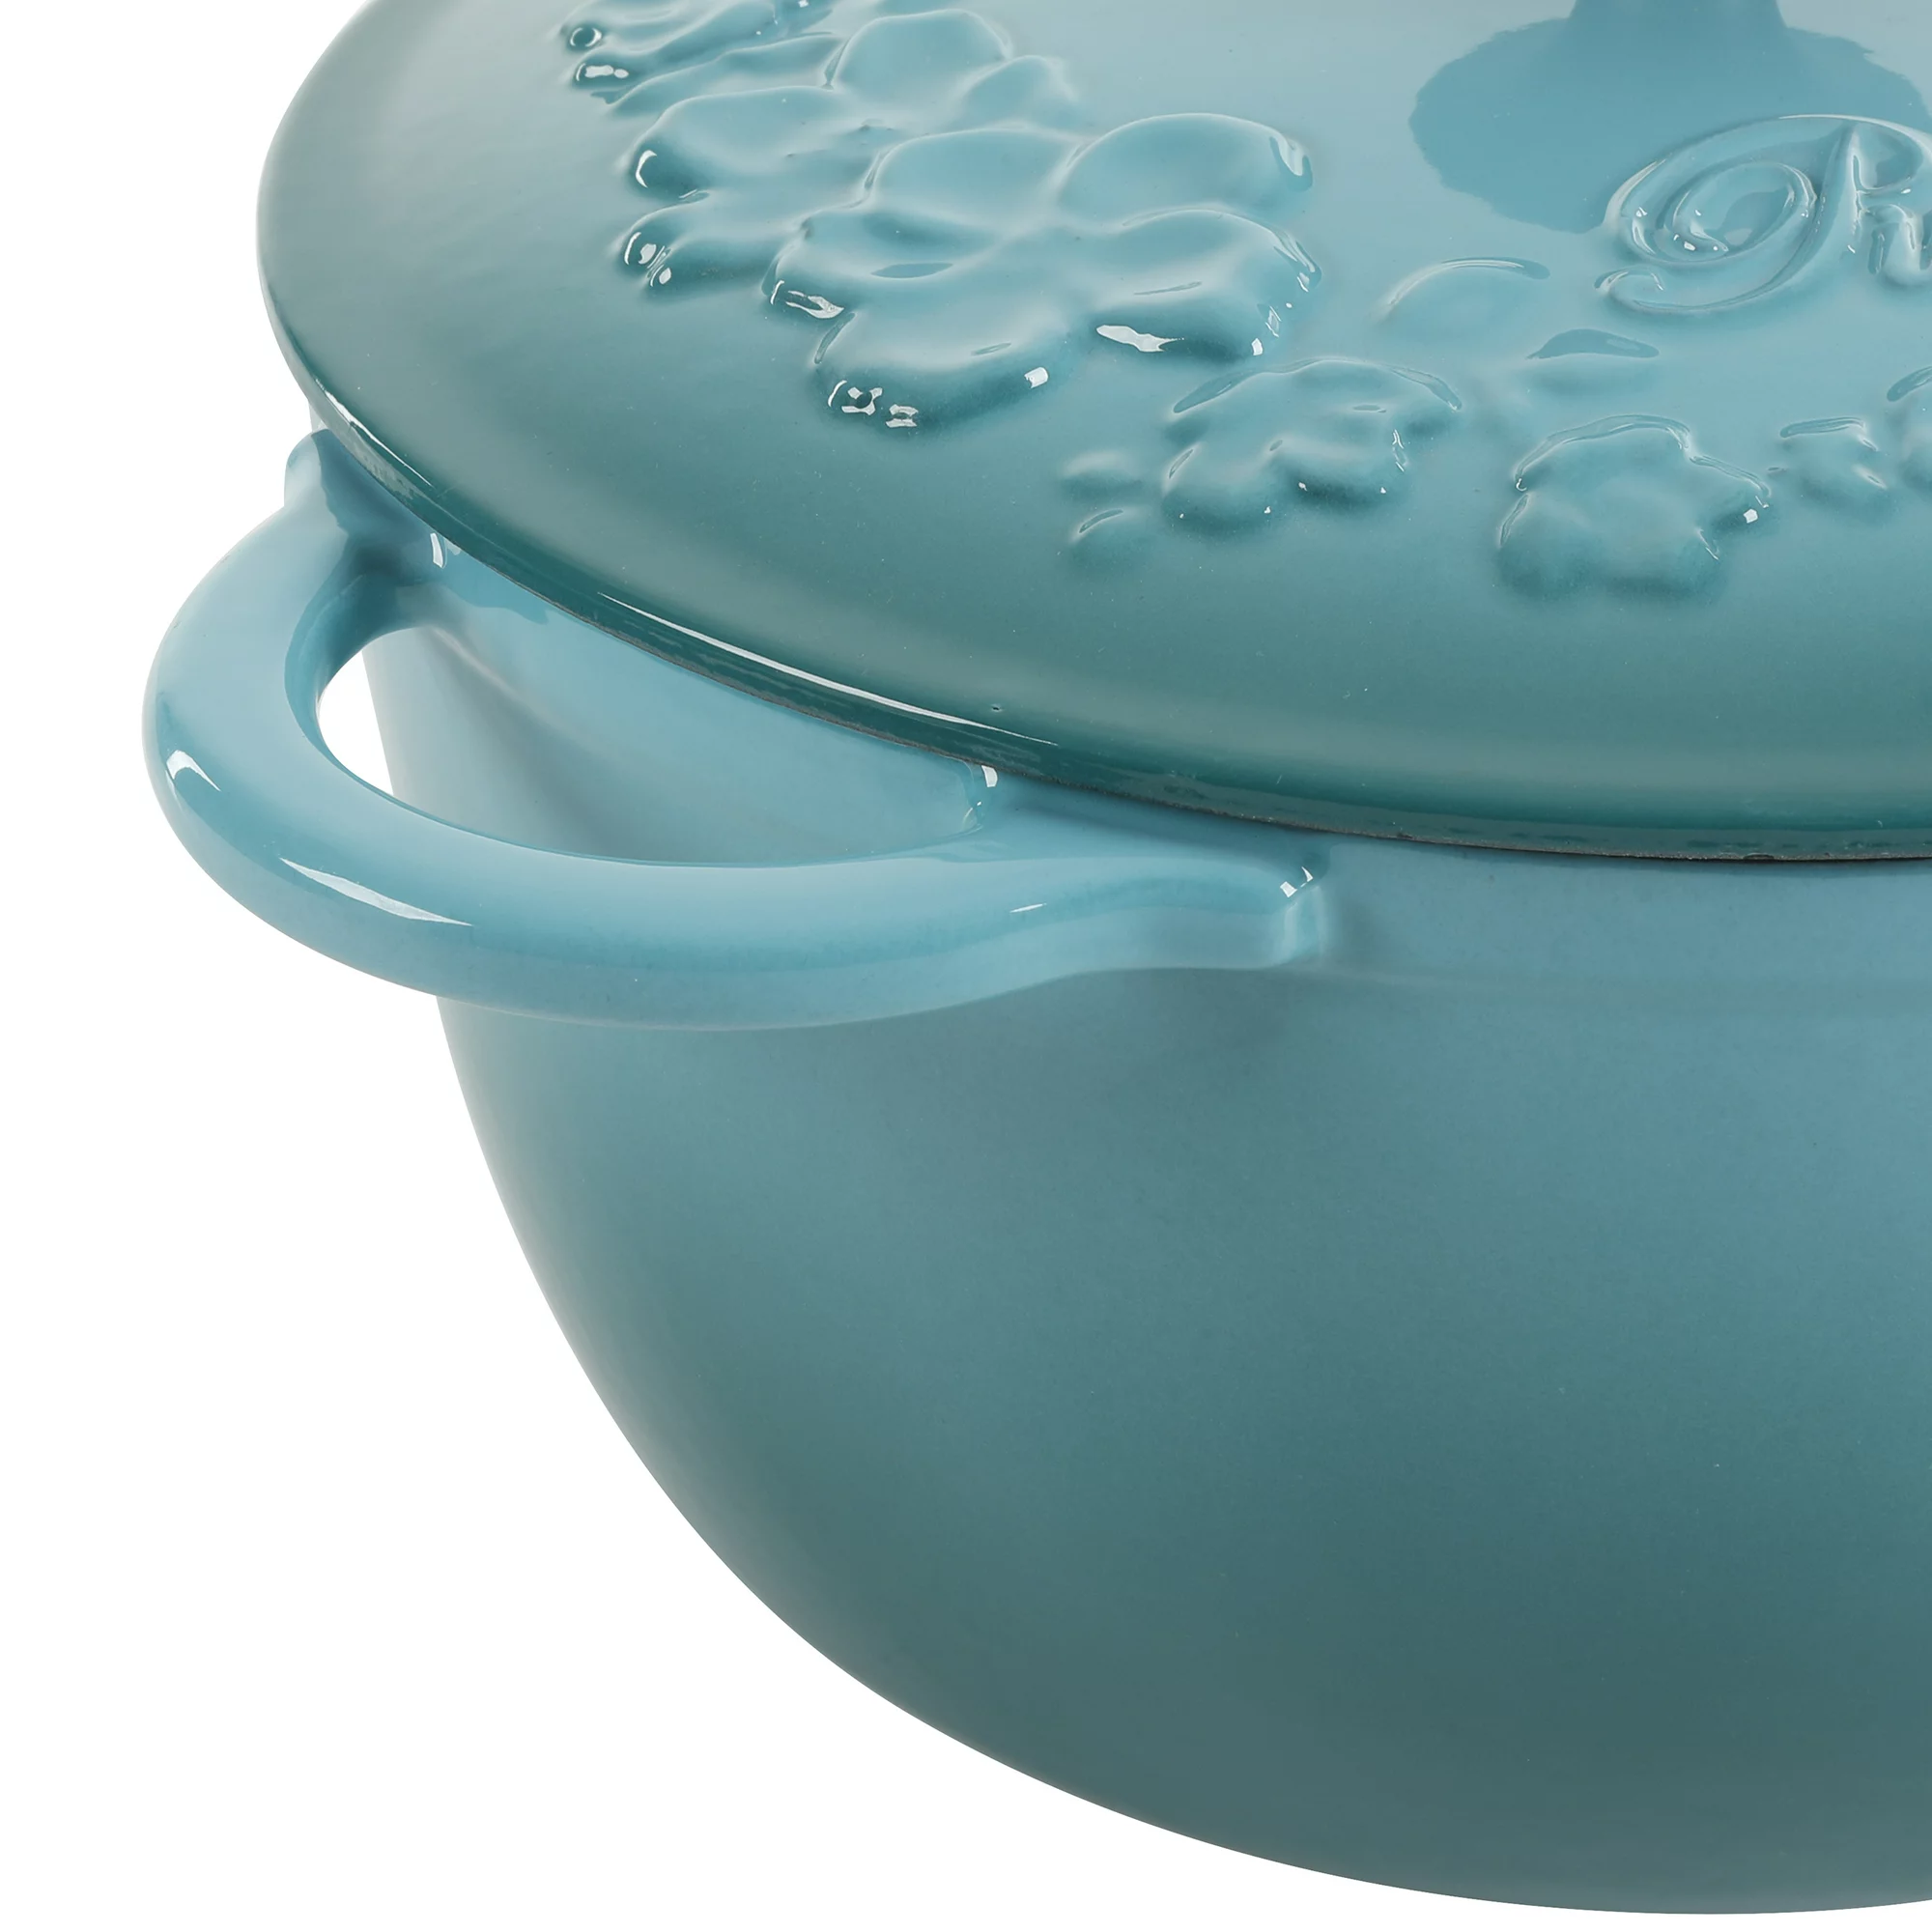 https://discounttoday.net/wp-content/uploads/2022/12/The-Pioneer-Woman-Timeless-Beauty-Enamel-on-Cast-Iron-6-Qt-Dutch-Oven-Turquoise5.webp